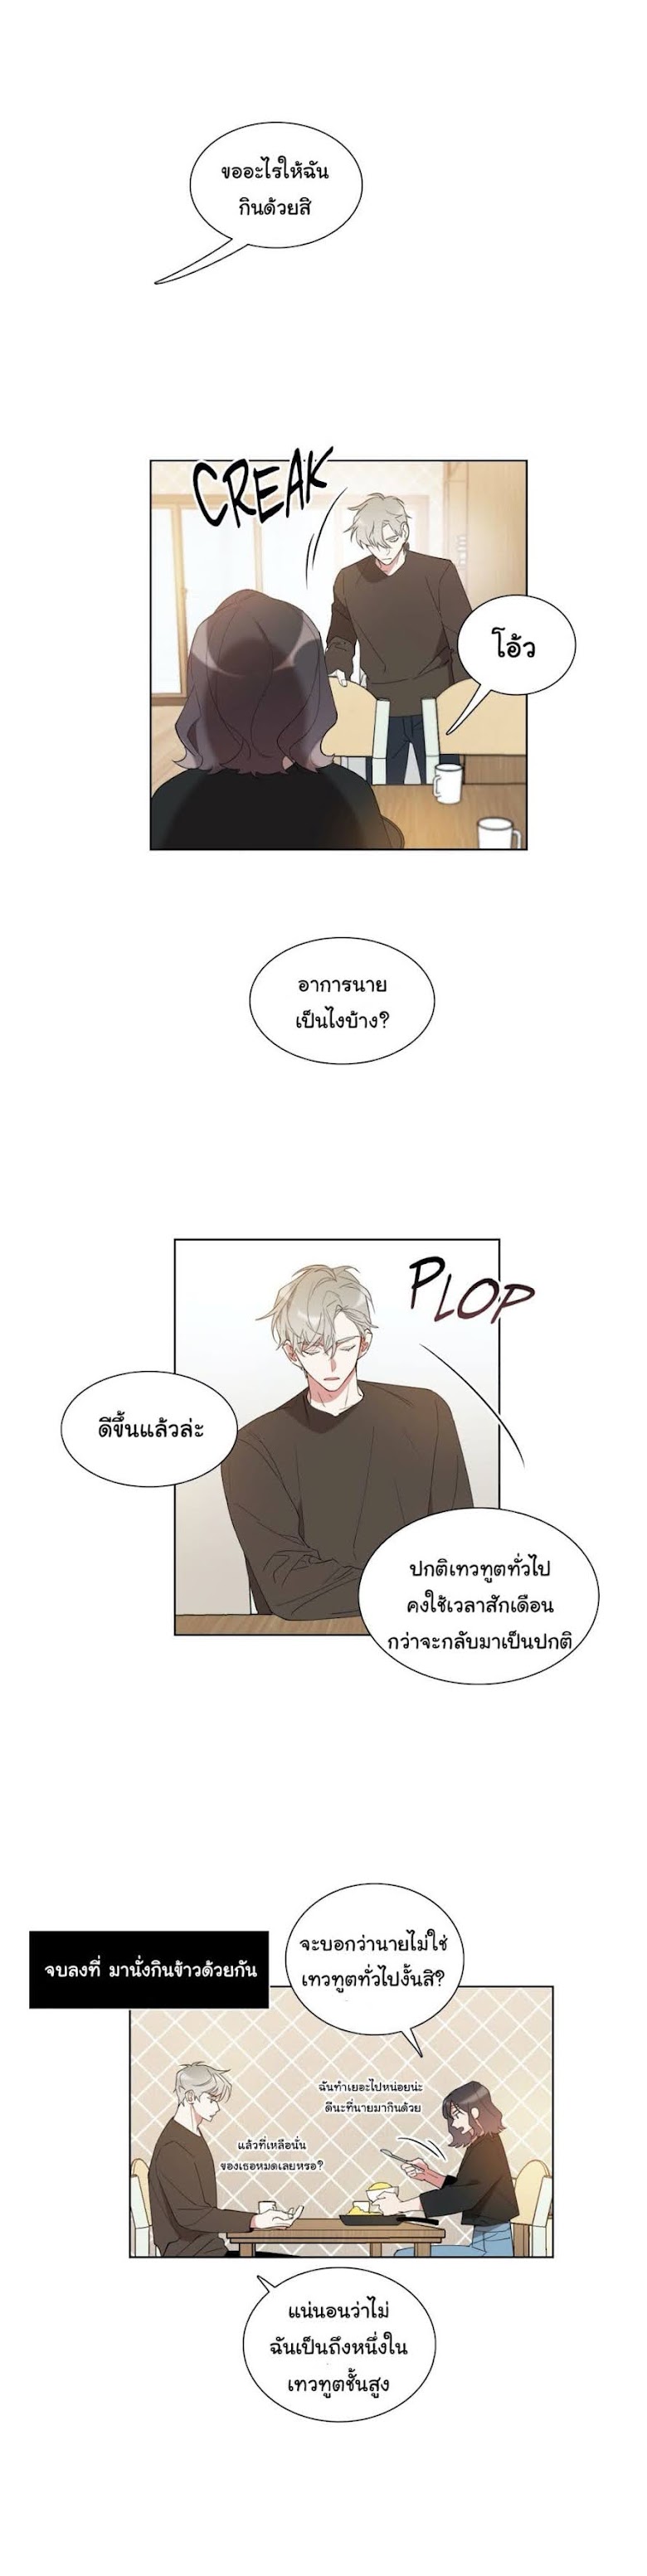 How to Use an Angel - หน้า 3